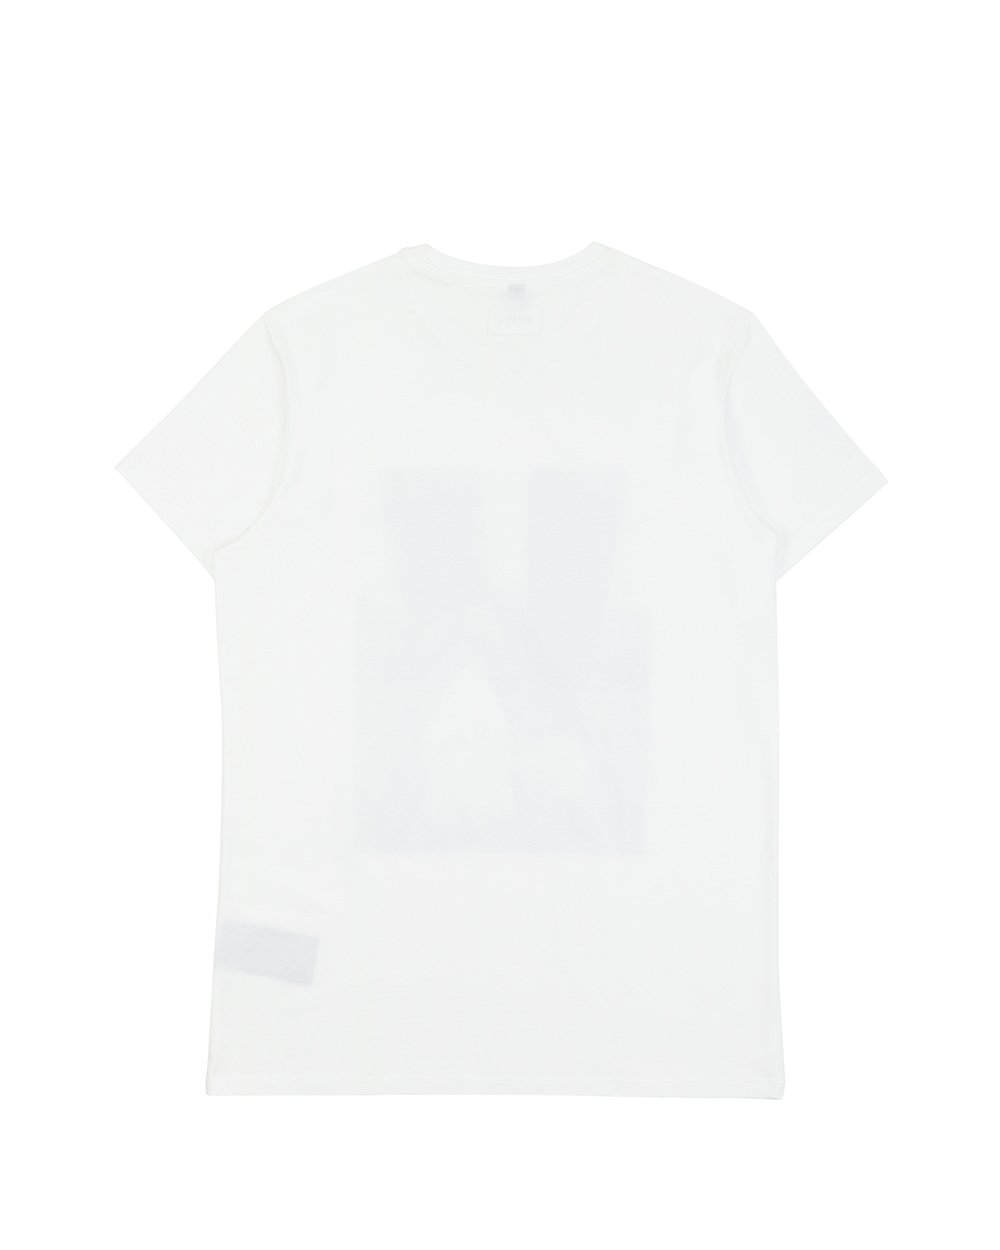 Cotton Printed Round Neck Short Sleeves T-shirt - ISSI Outlet